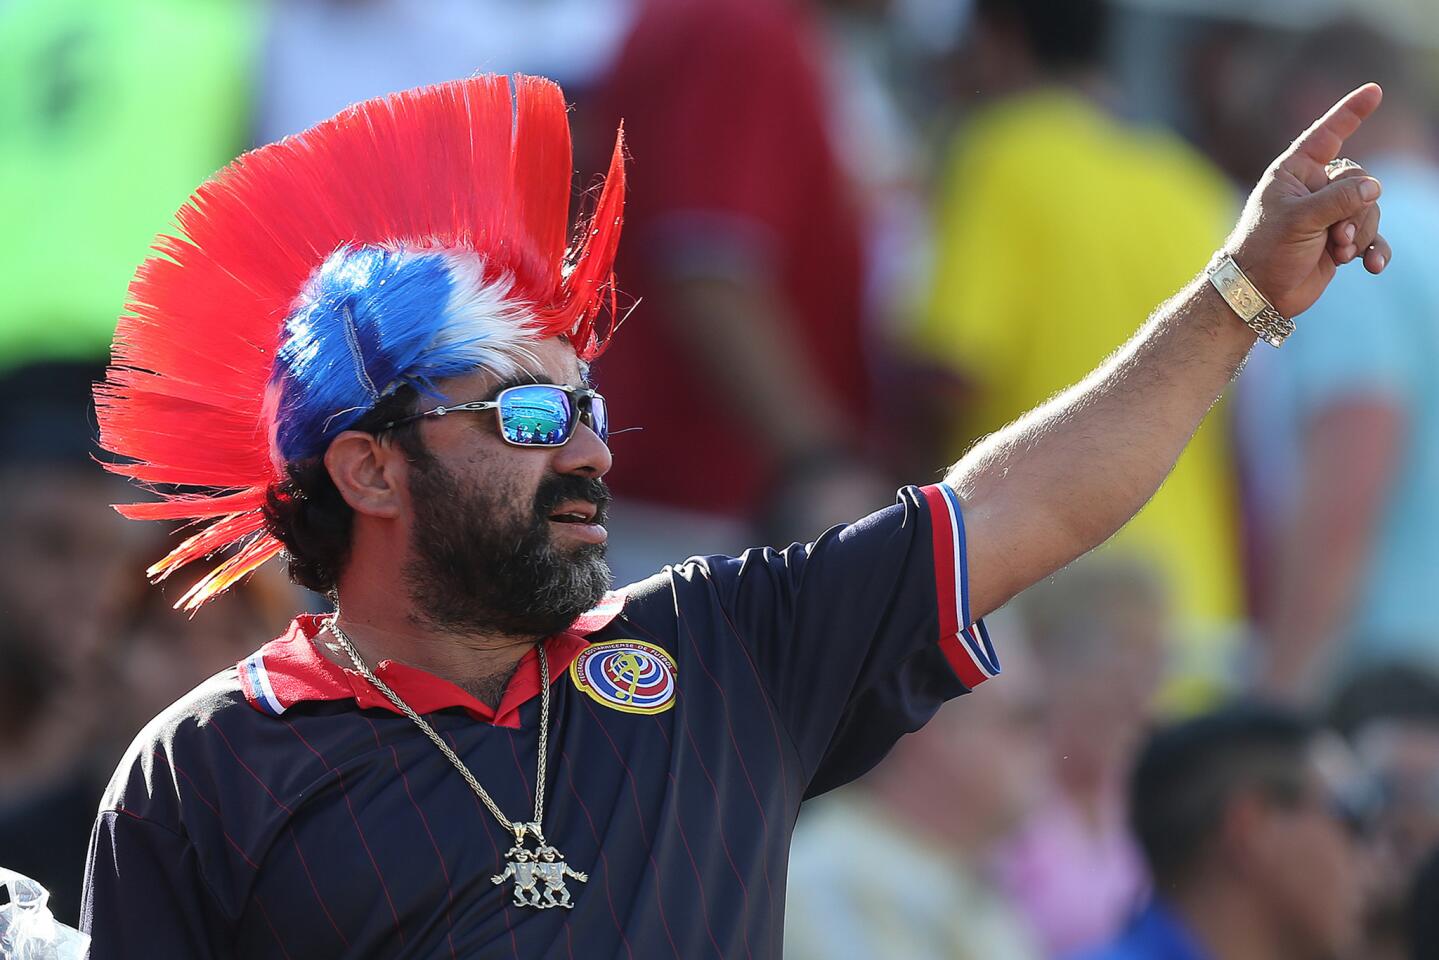 A soccer fan is seen in the stands during the 2016 Copa America Centenario Group A match between Costa Rica and Paraguay at Camping World Stadium on June 4, 2016 in Orlando, Florida.